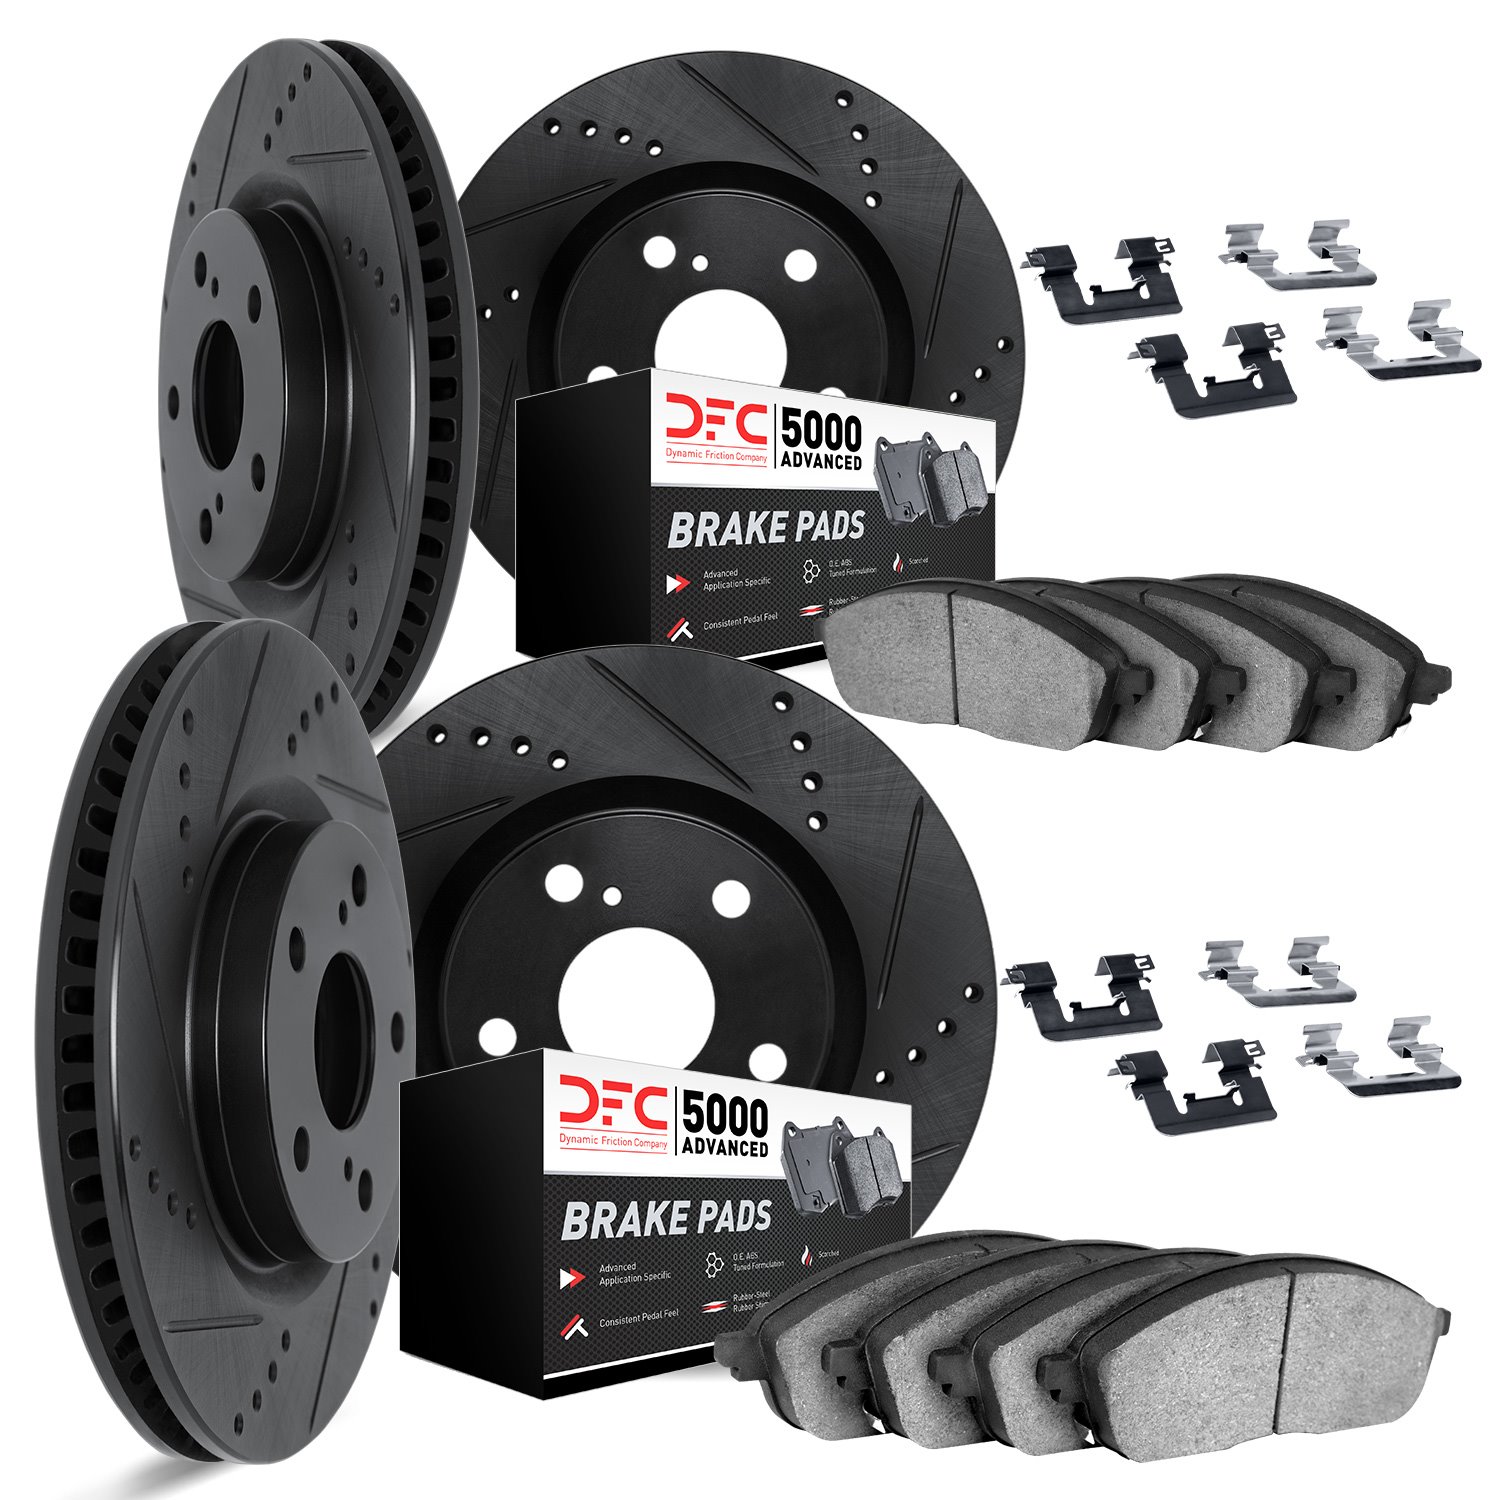 8514-31029 Drilled/Slotted Brake Rotors w/5000 Advanced Brake Pads Kit & Hardware [Black], 2013-2020 BMW, Position: Front and Re